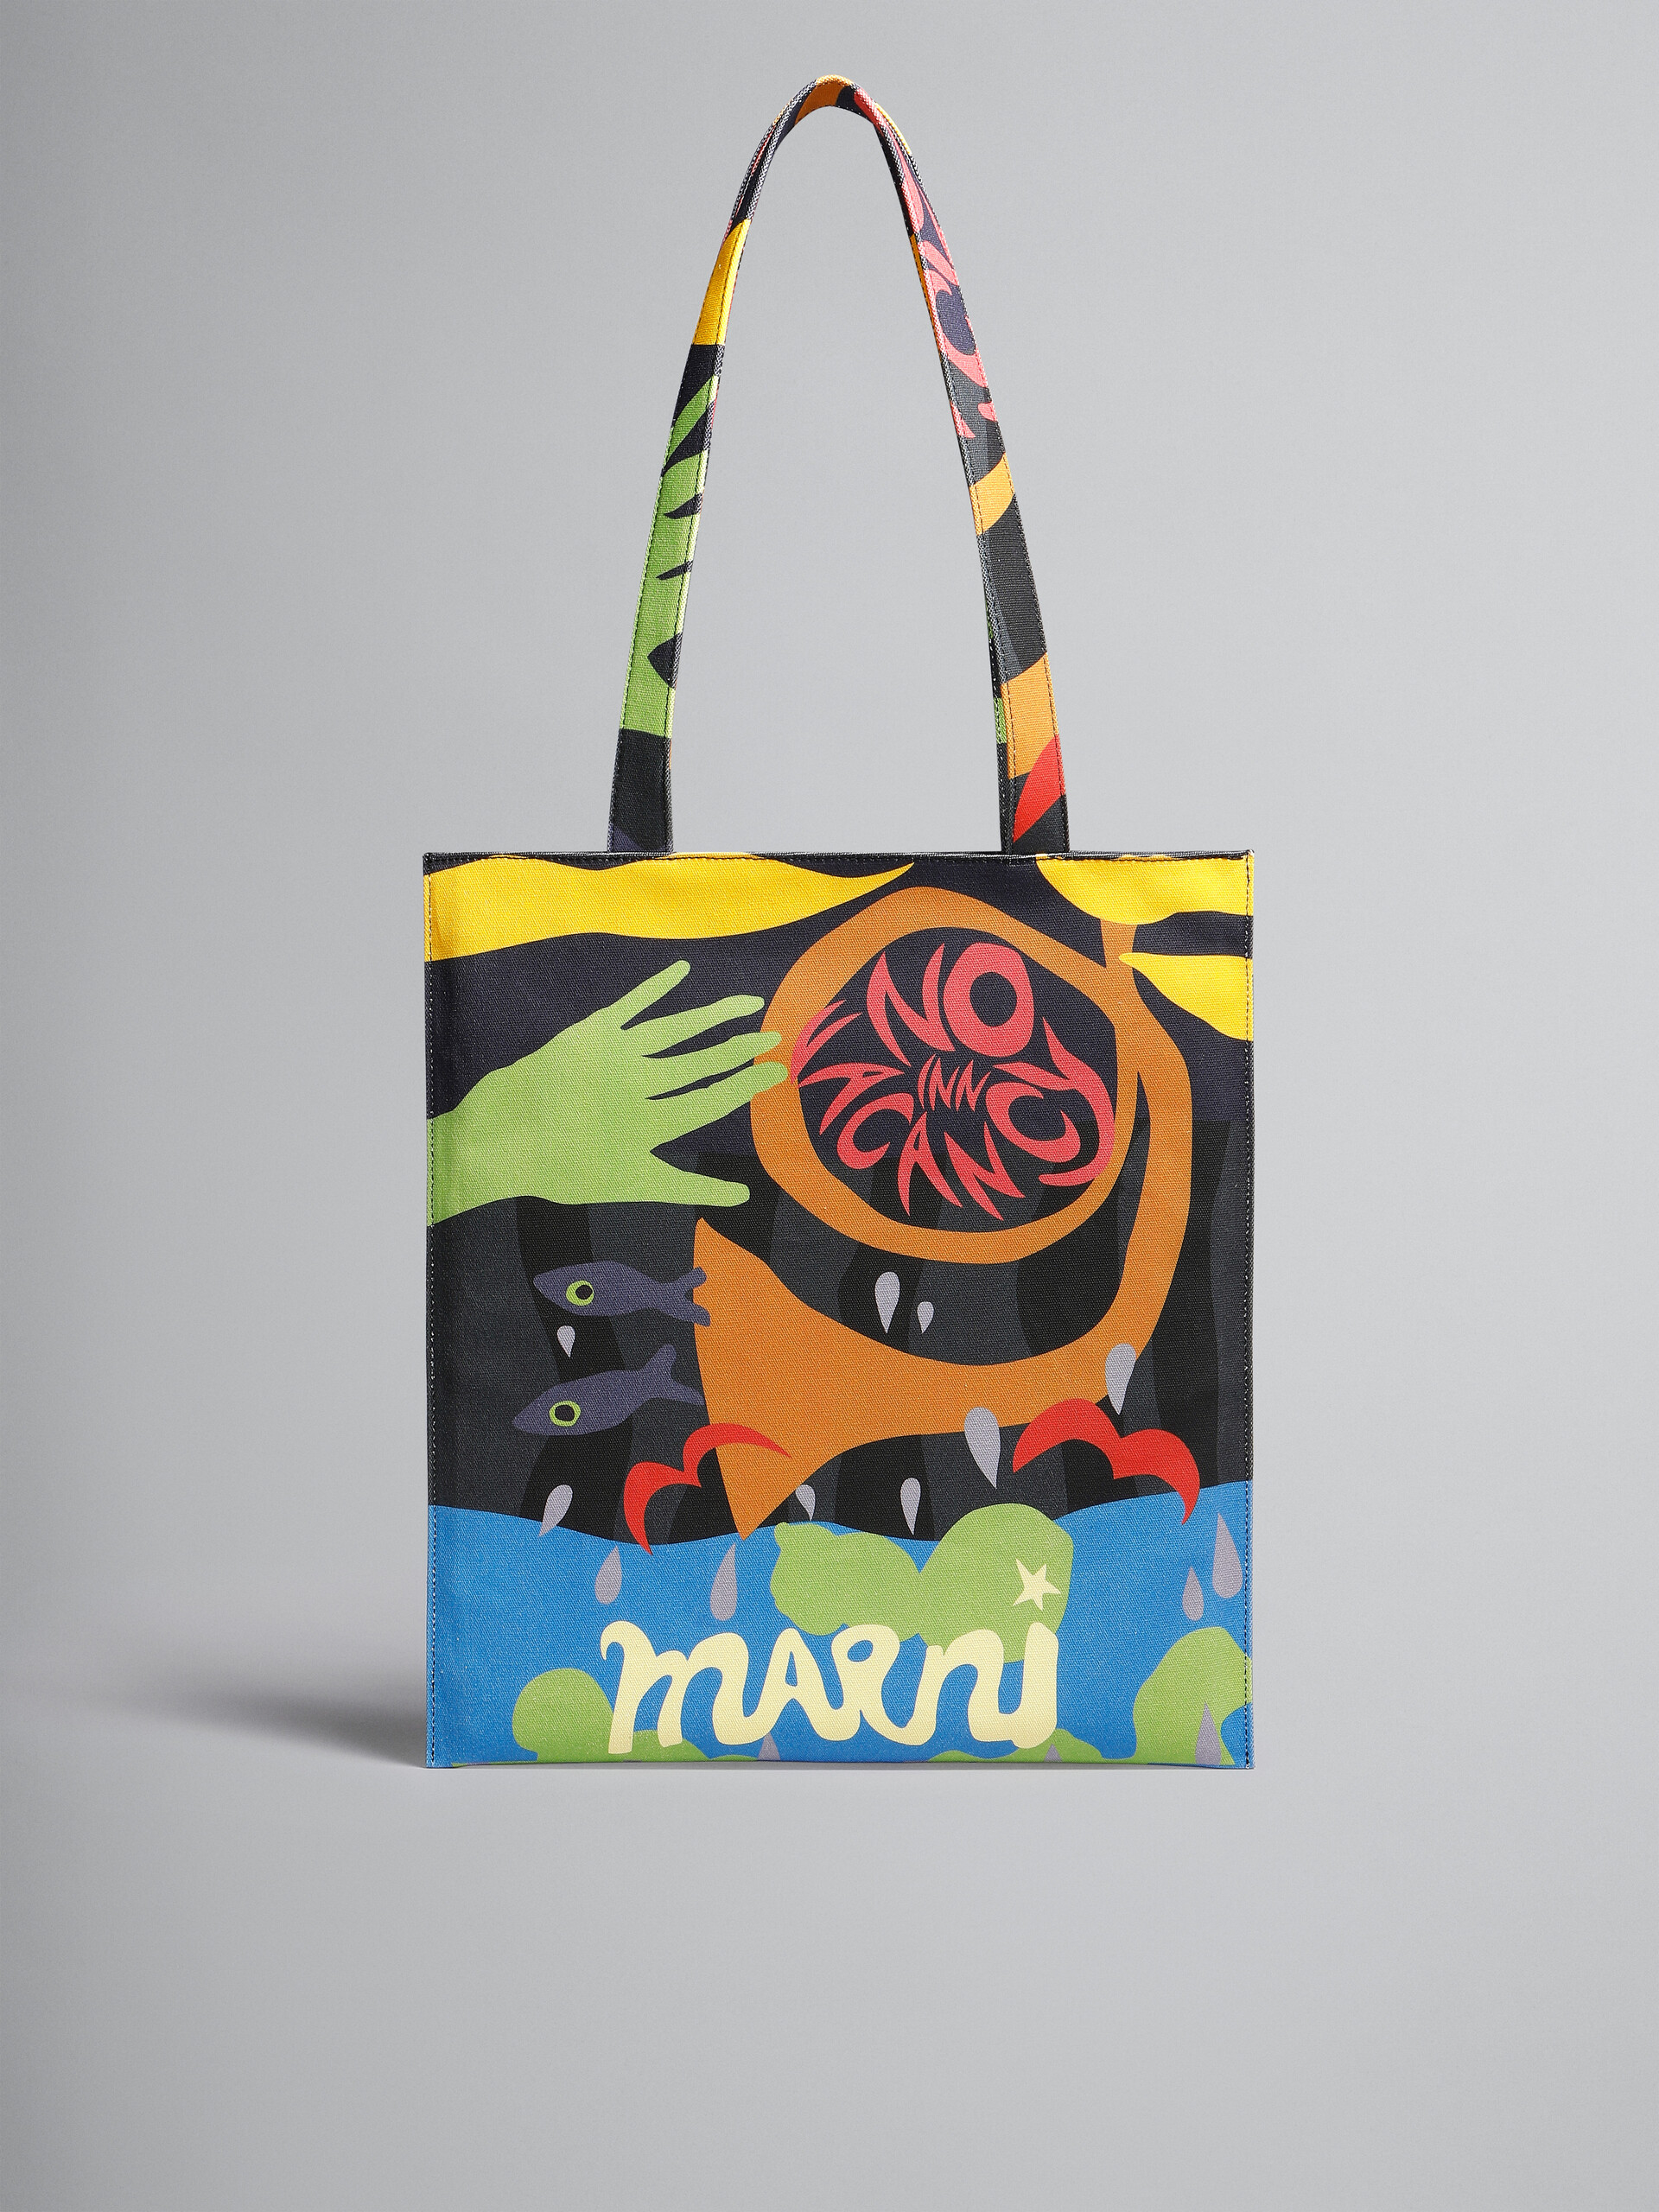 Marni x No Vacancy Inn - Tote Bag in coated canvas with print - Shopping Bags - Image 1